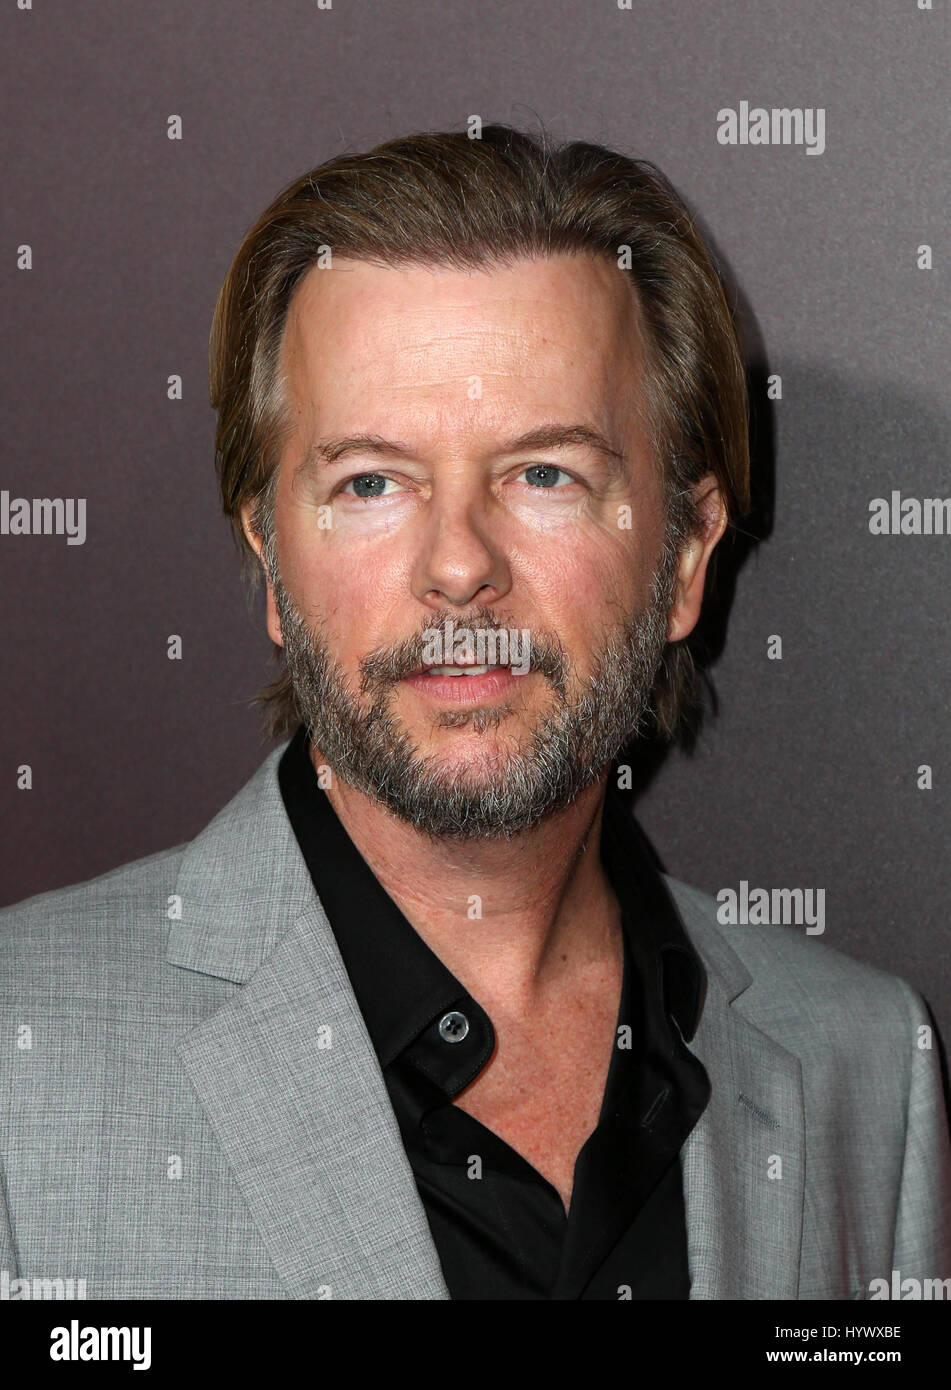 Hollywood, USA. 06th Apr, 2017. David Spade, at Premiere of Netflix's 'Sandy Wexler at The ArcLight Cinemas Cinerama Dome in California on April 06, 2017. Credit: Fs/Media Punch/Alamy Live News Stock Photo